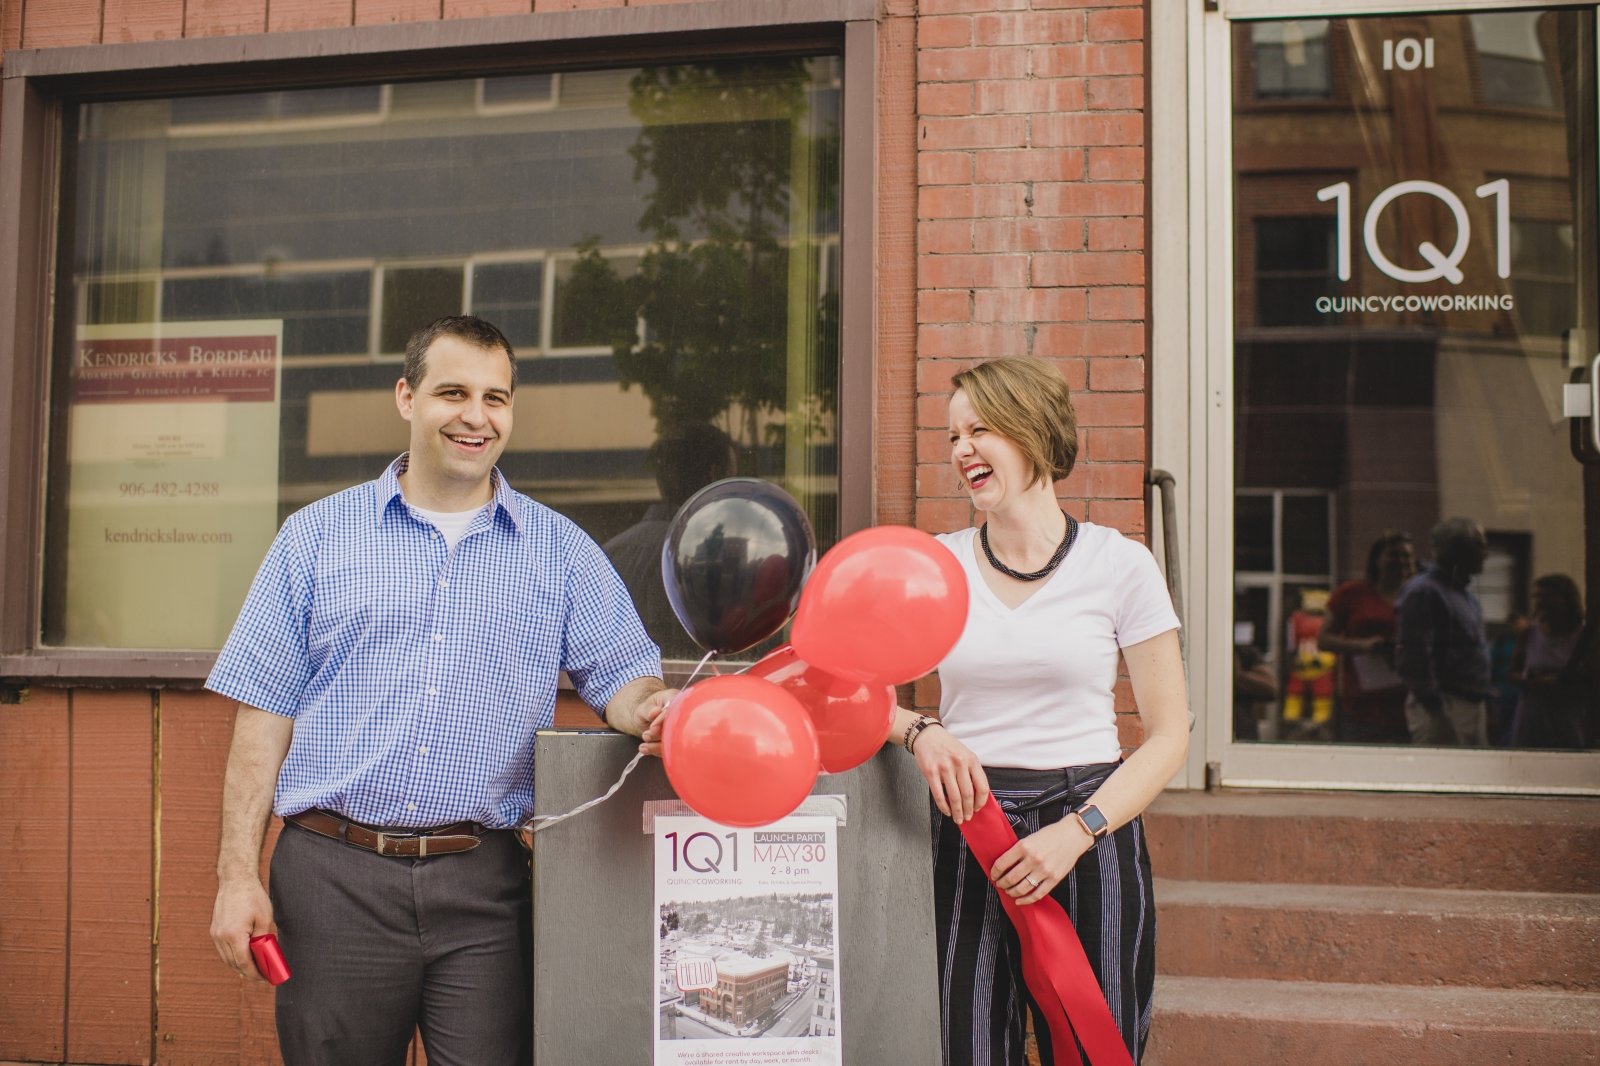 Two Michigan Tech alumni opened 101 Quincy Coworking in Hancock on May 30. GrandBridge Properties plans to open a business center with a coworking station in Houghton.